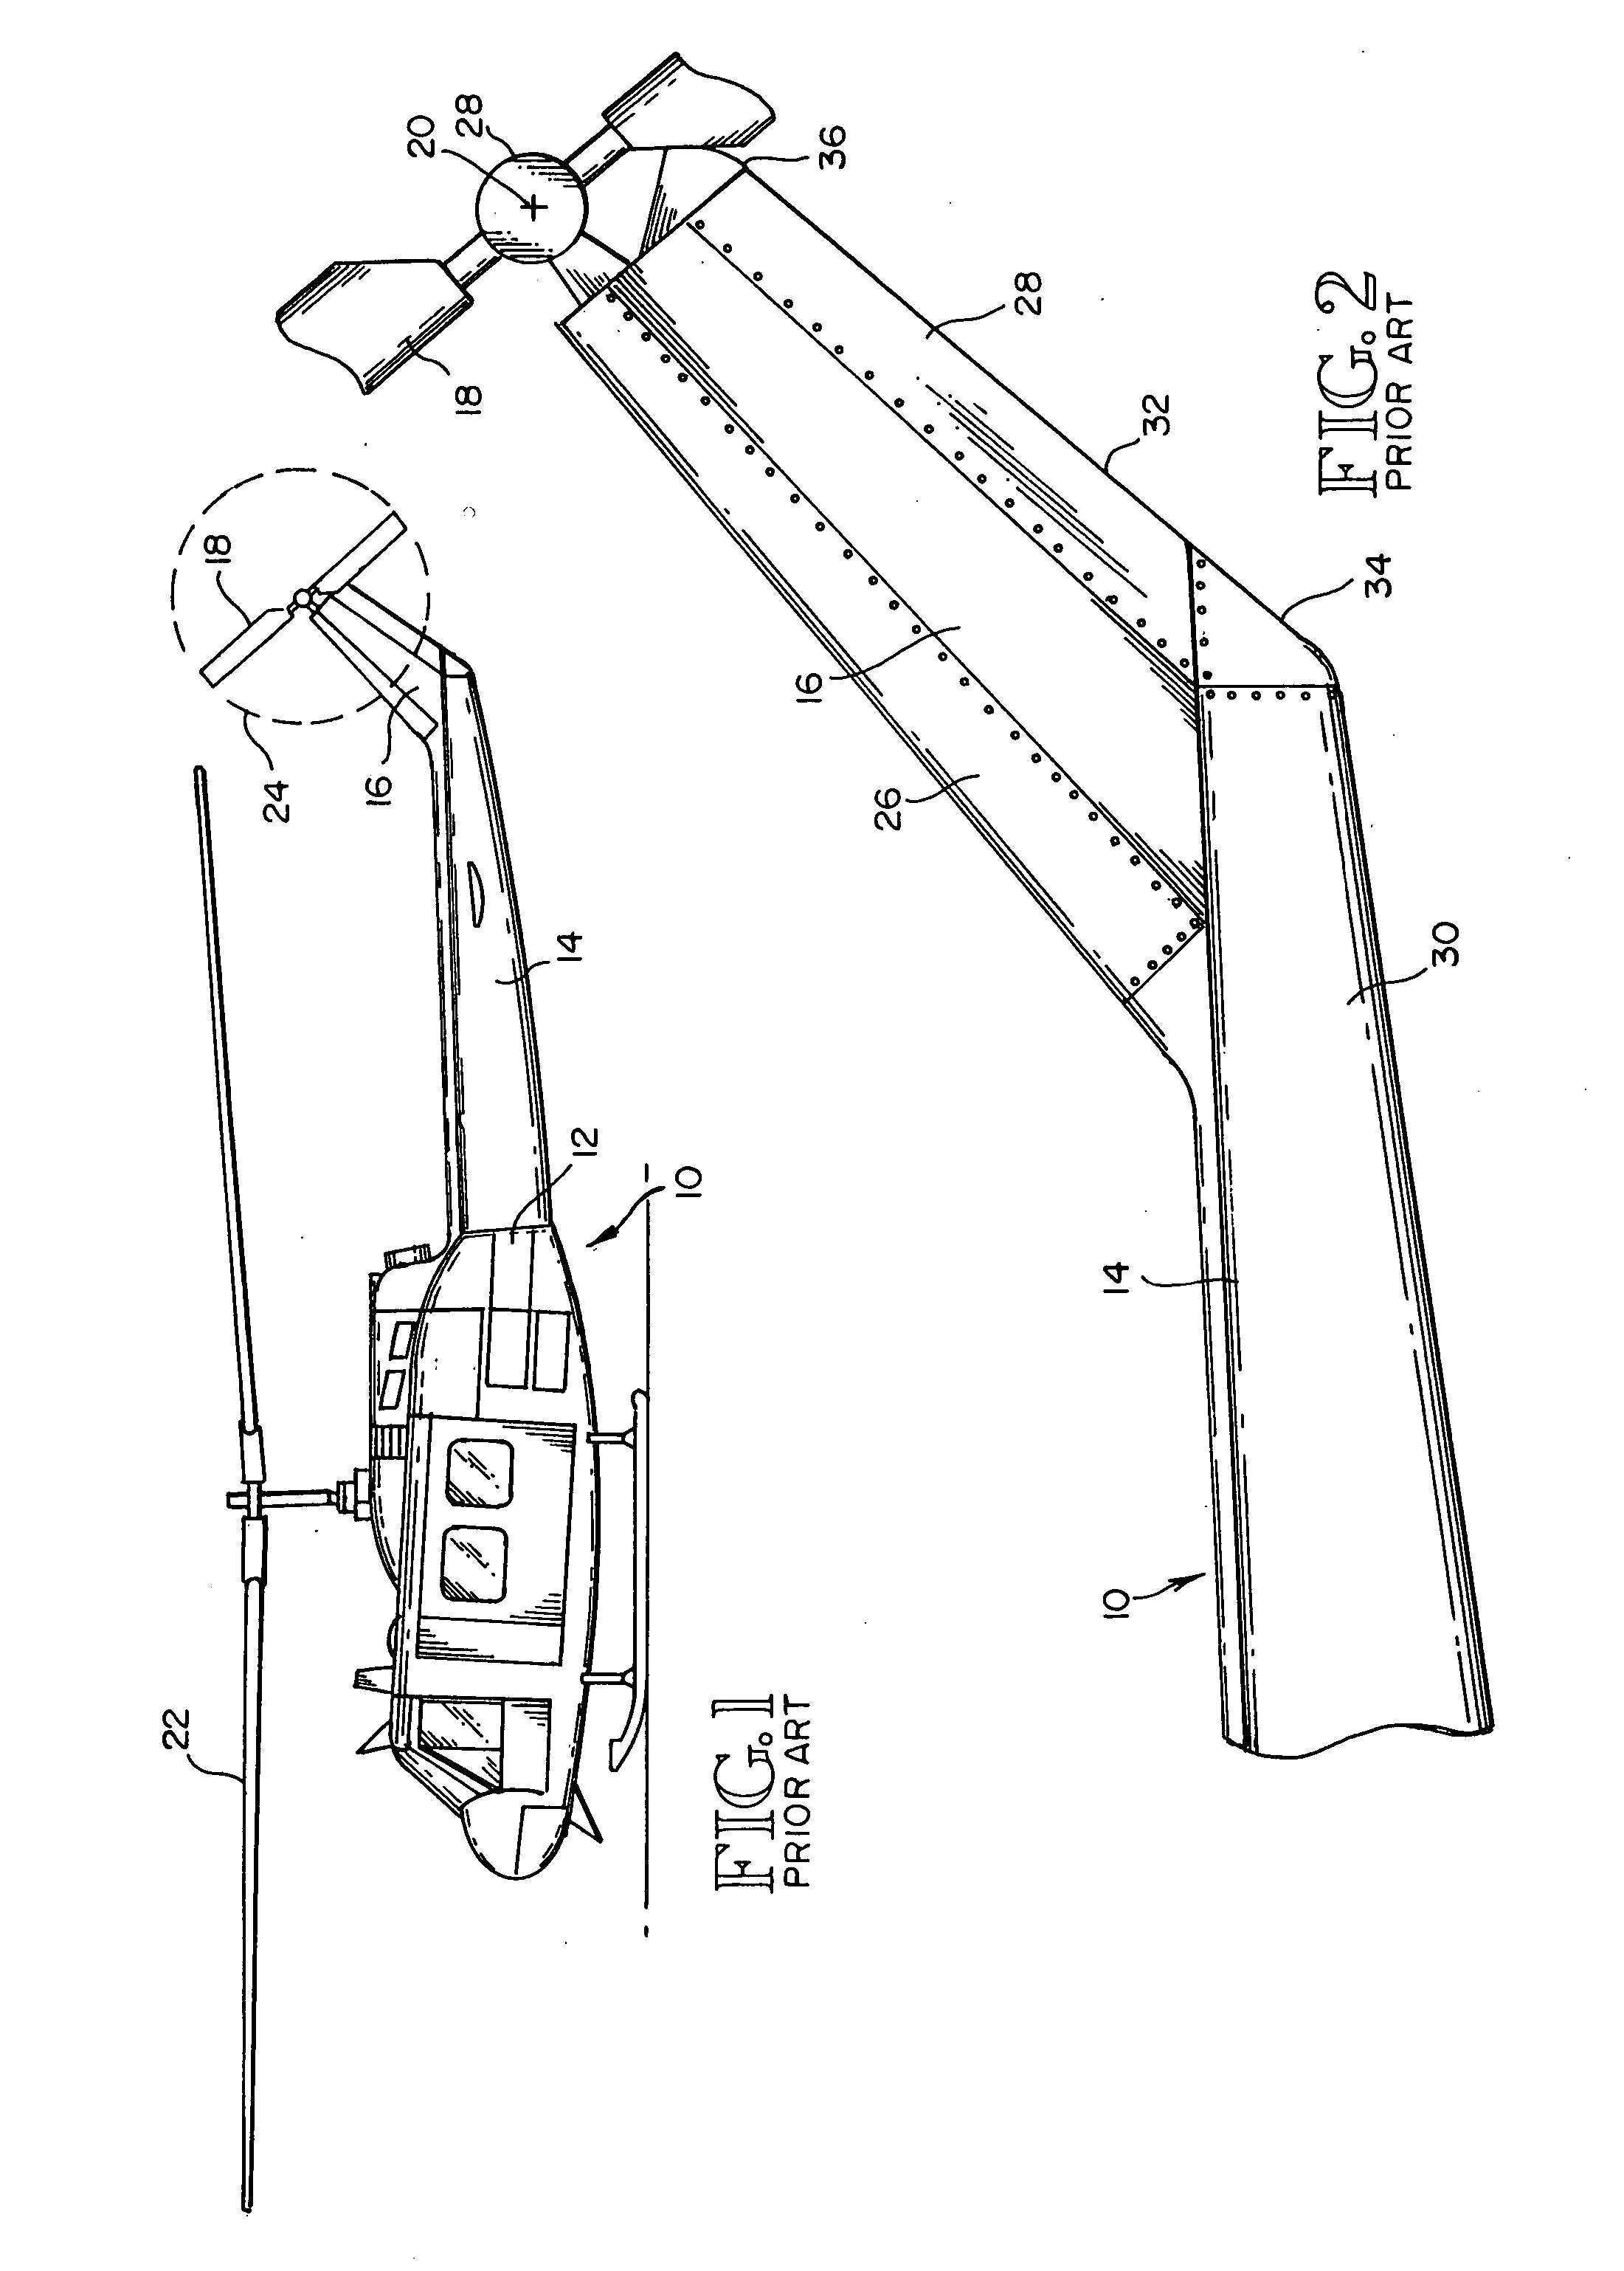 Helicopter tail section and retrofit method